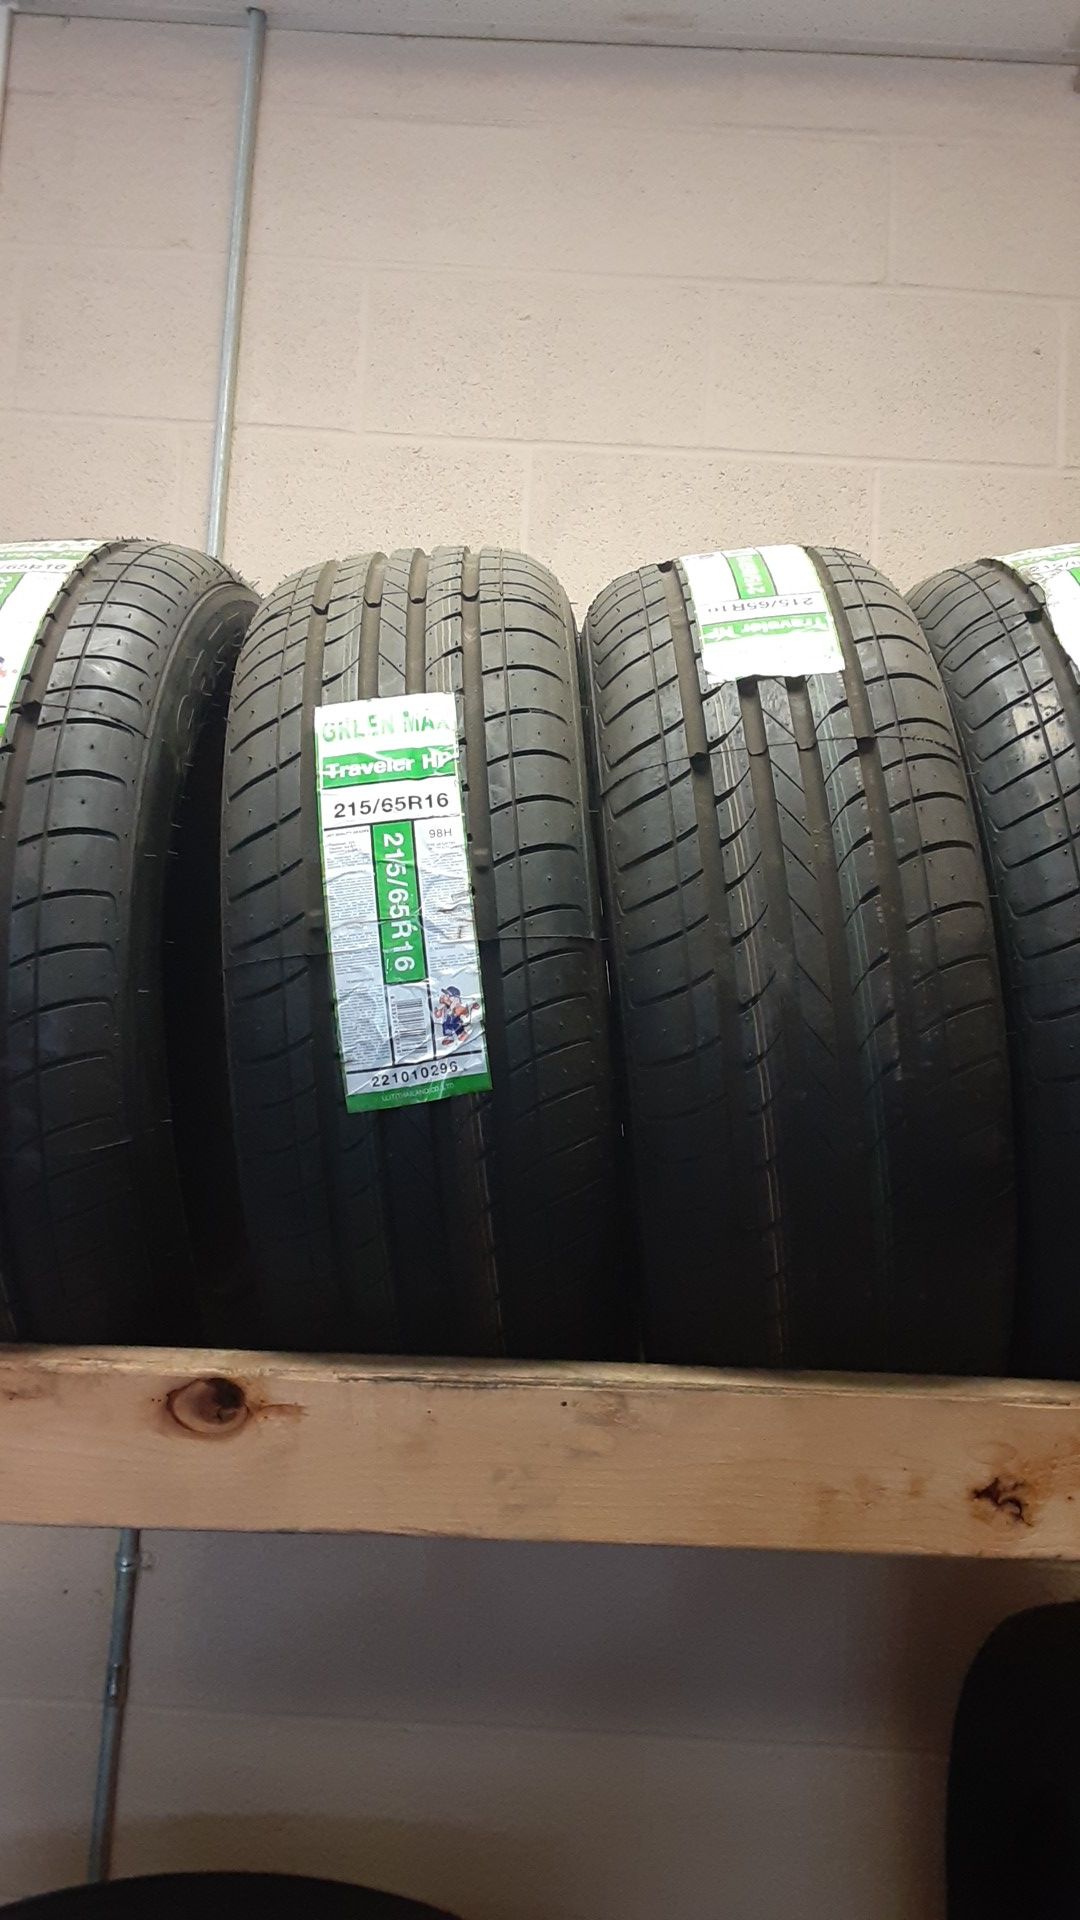 Set of 4 new tires 215/65r16